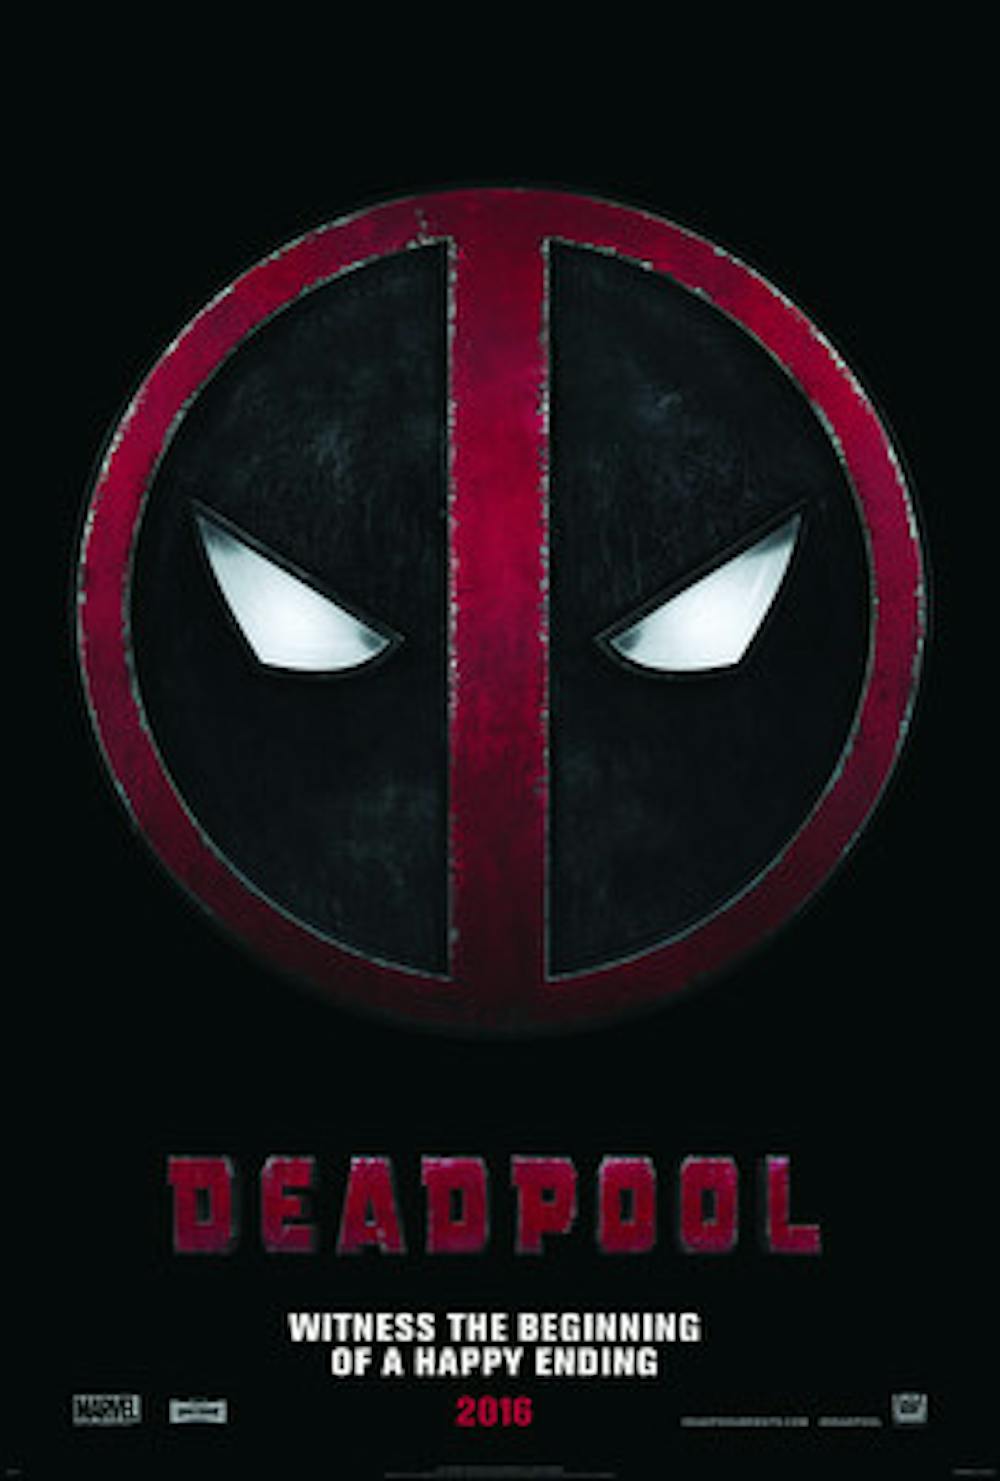 With its crude humor, gruesome action scenes, and foul-mouthed "hero," "Deadpool" is a refreshing departure from the "superhero movie" archetype. 